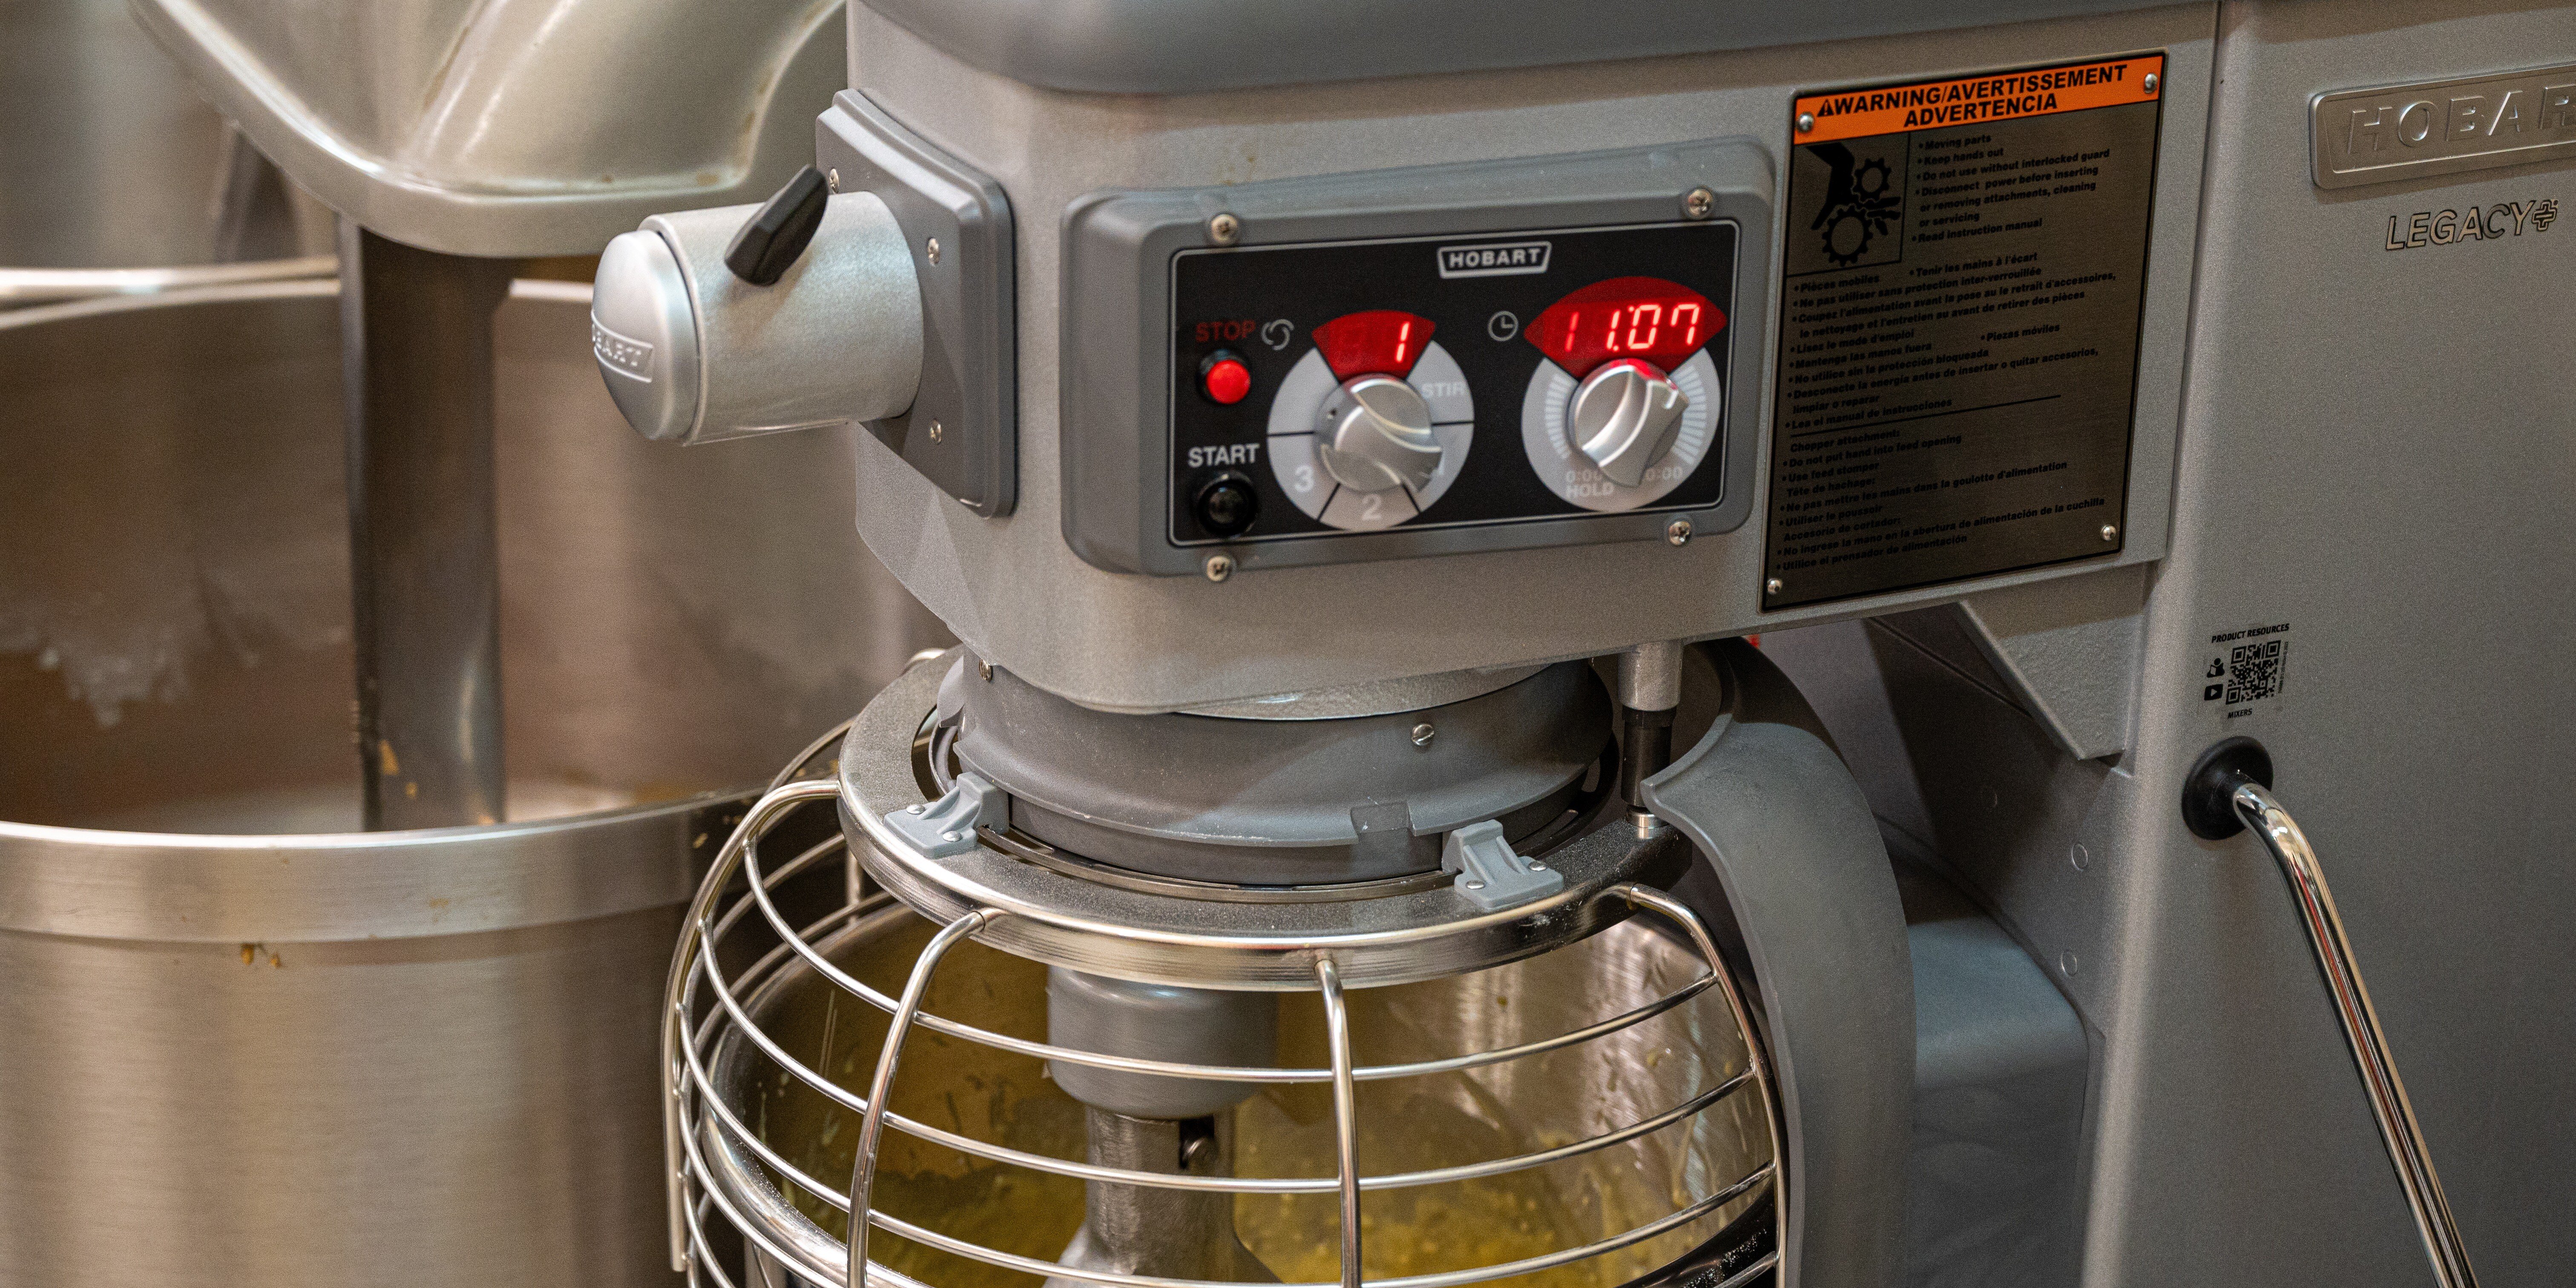 When Should You Replace Your Mixer?